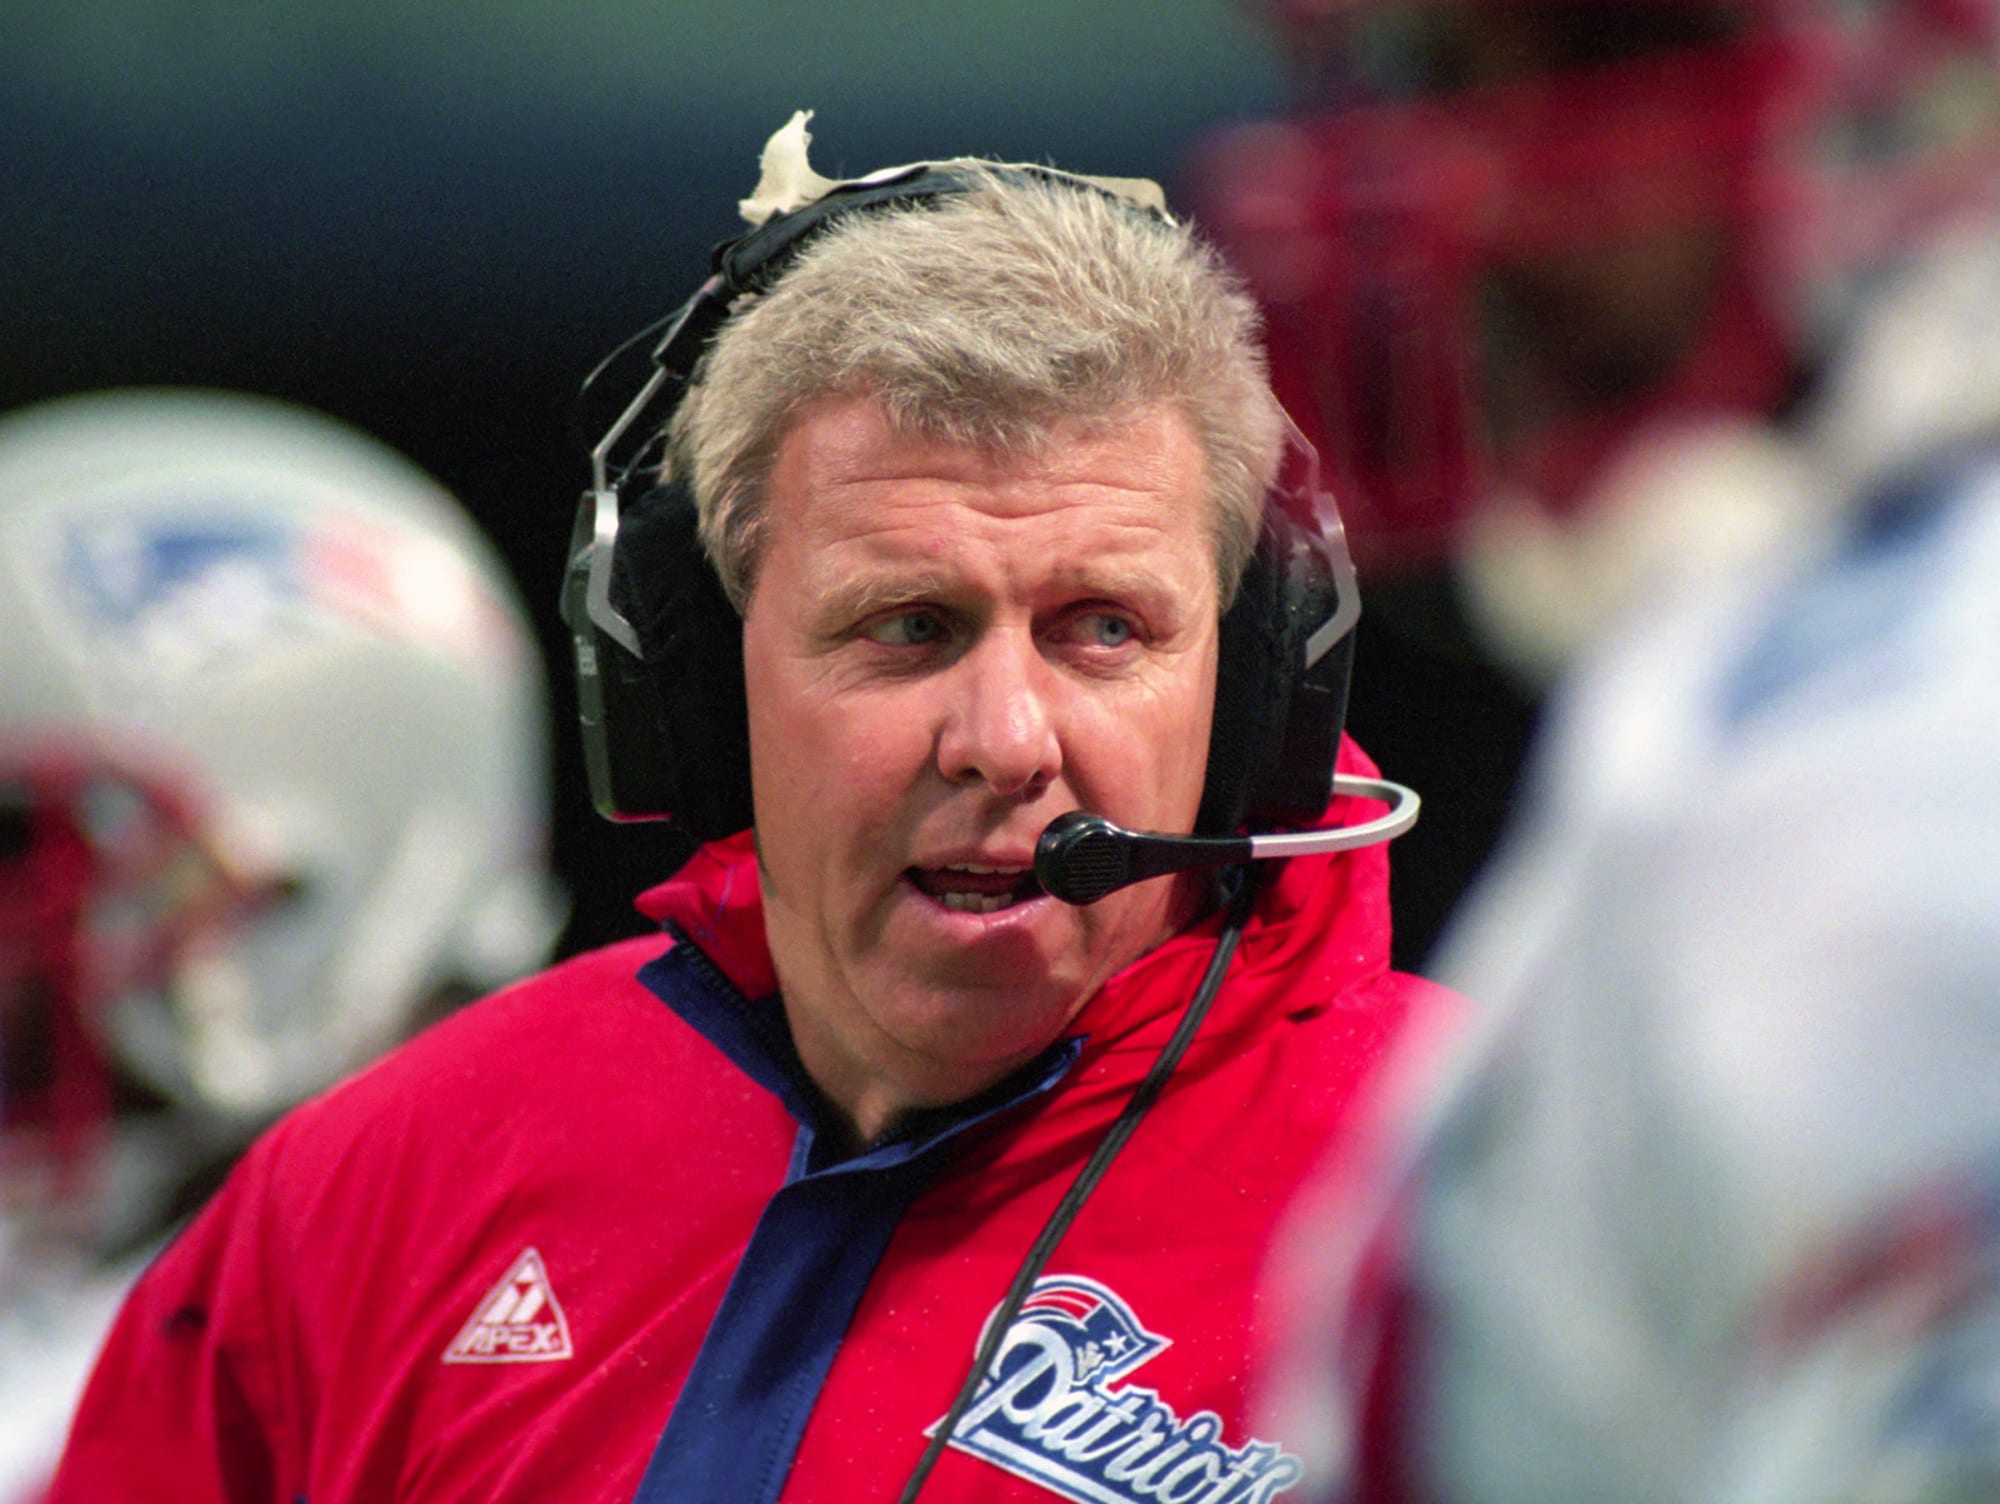 Bill Parcells should be inducted into the New England Patriots Hall of Fame